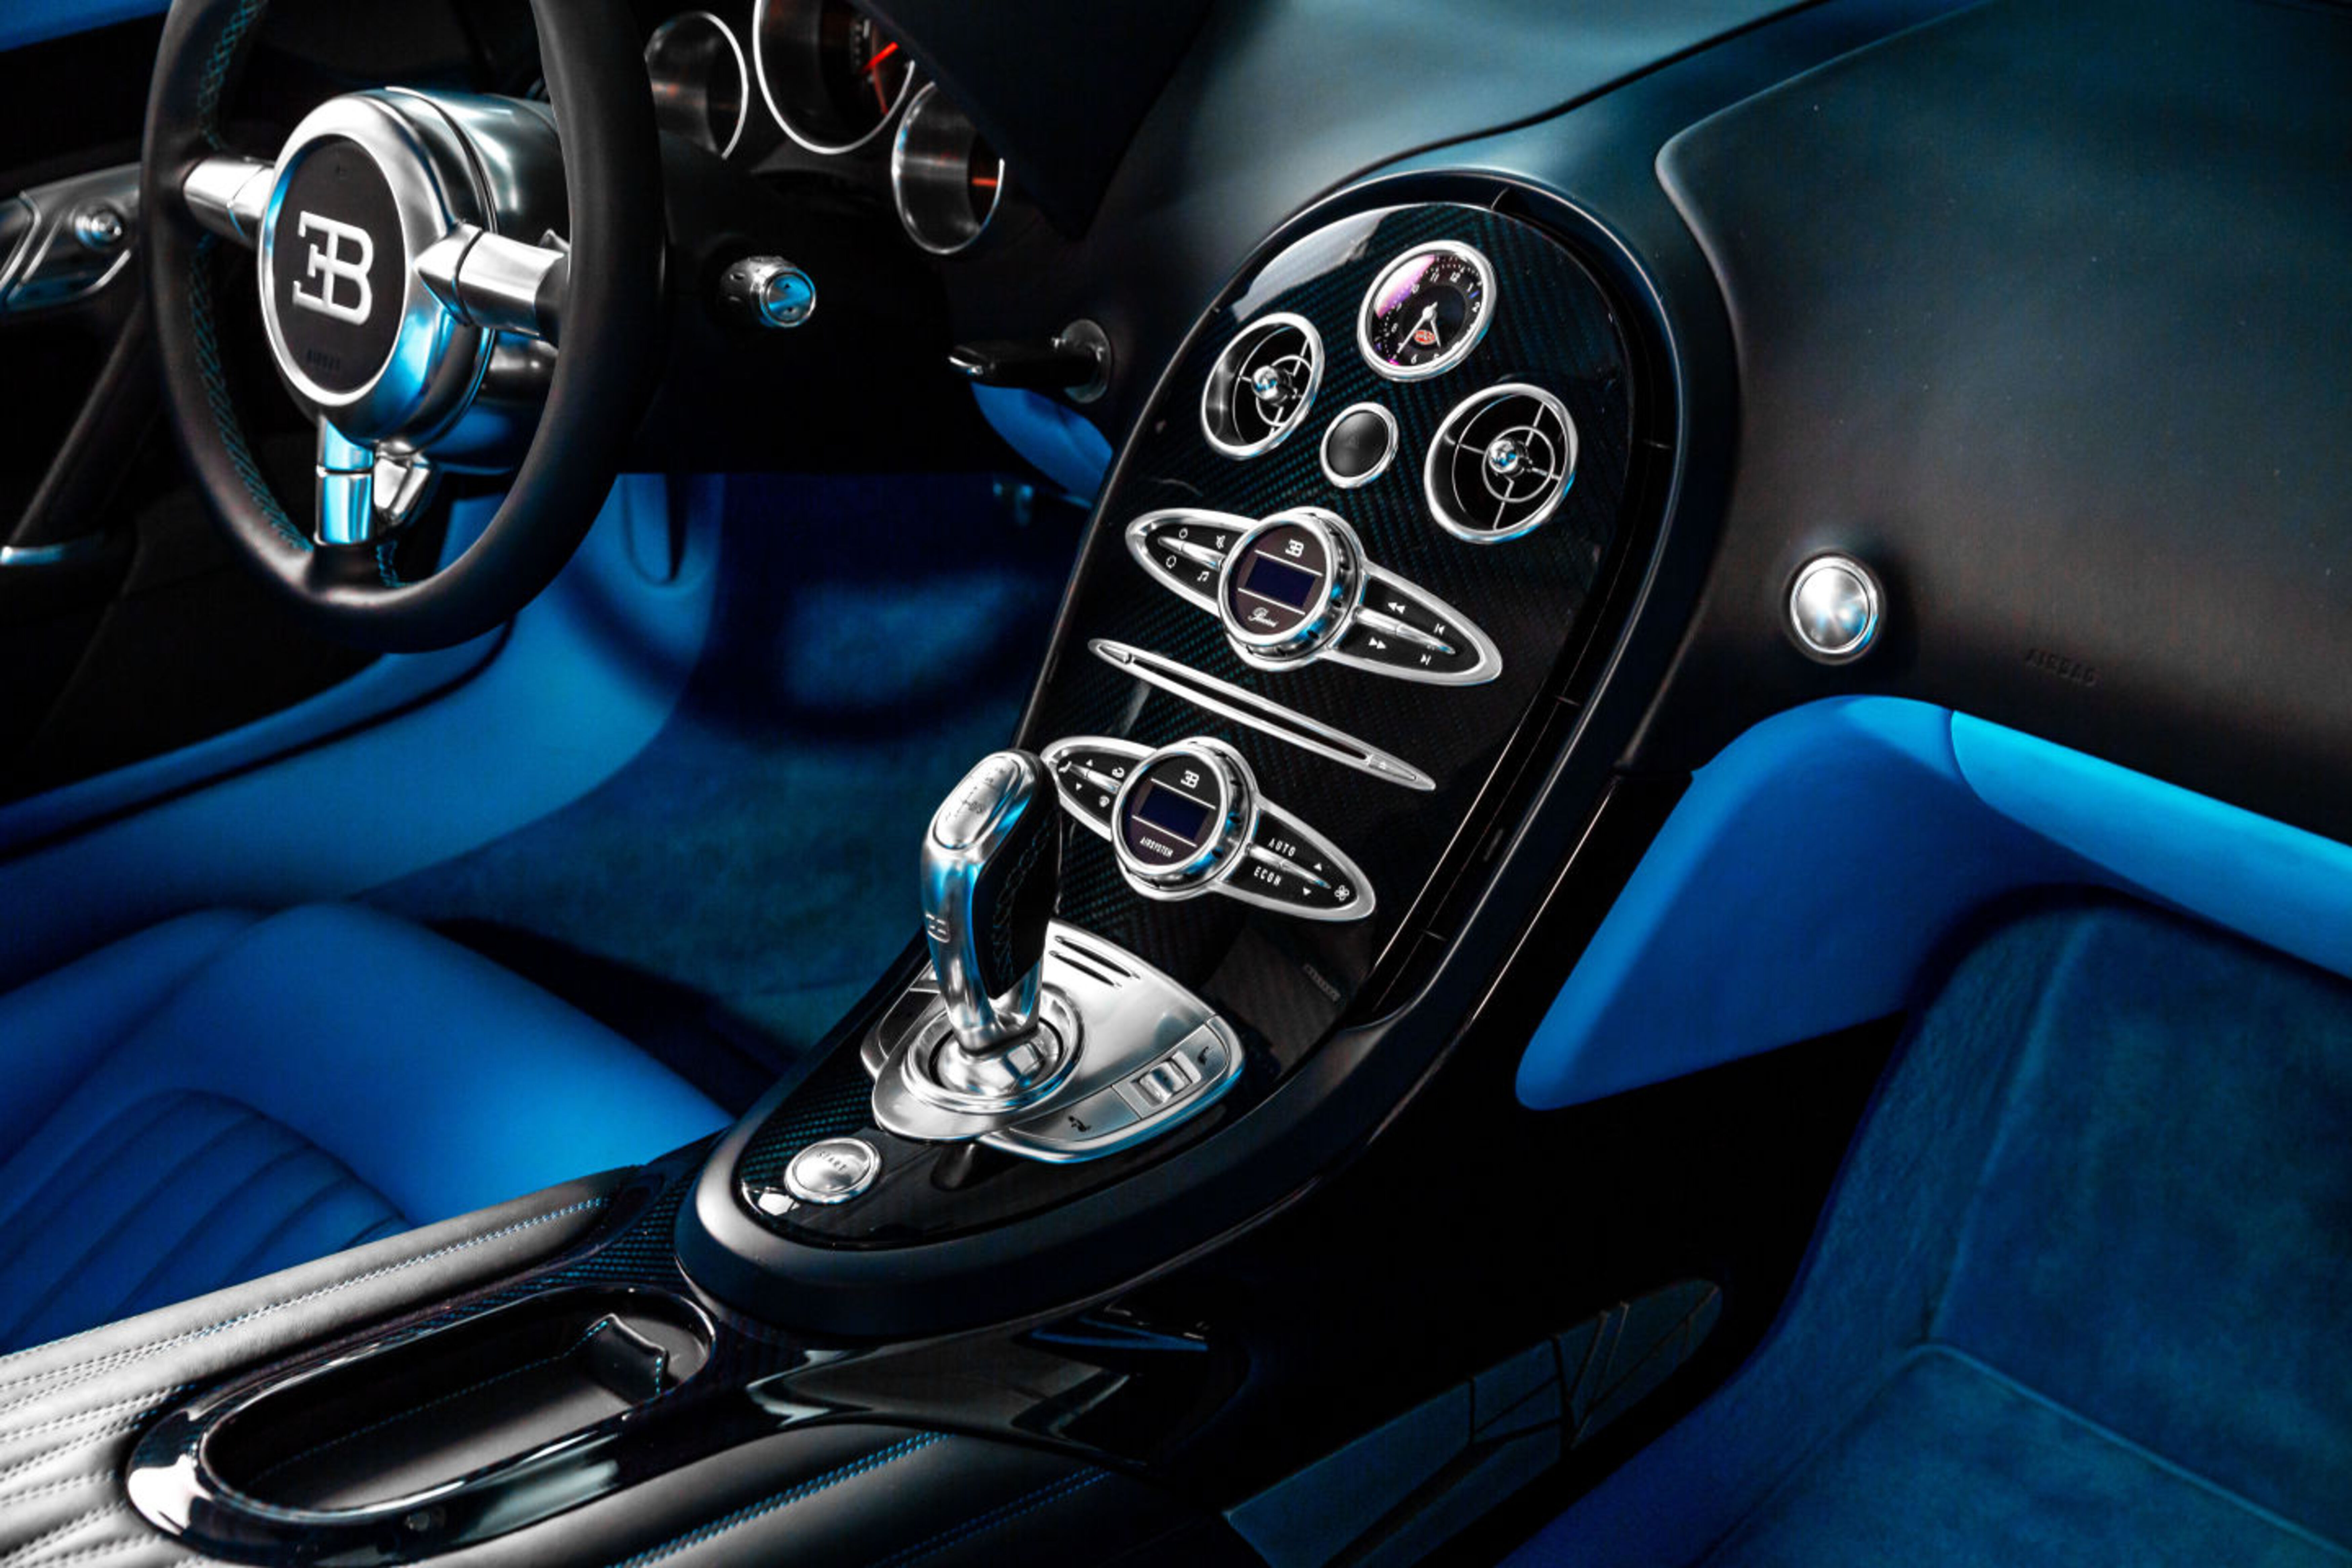 The theme of the exterior paintwork carries through to the car’s interior